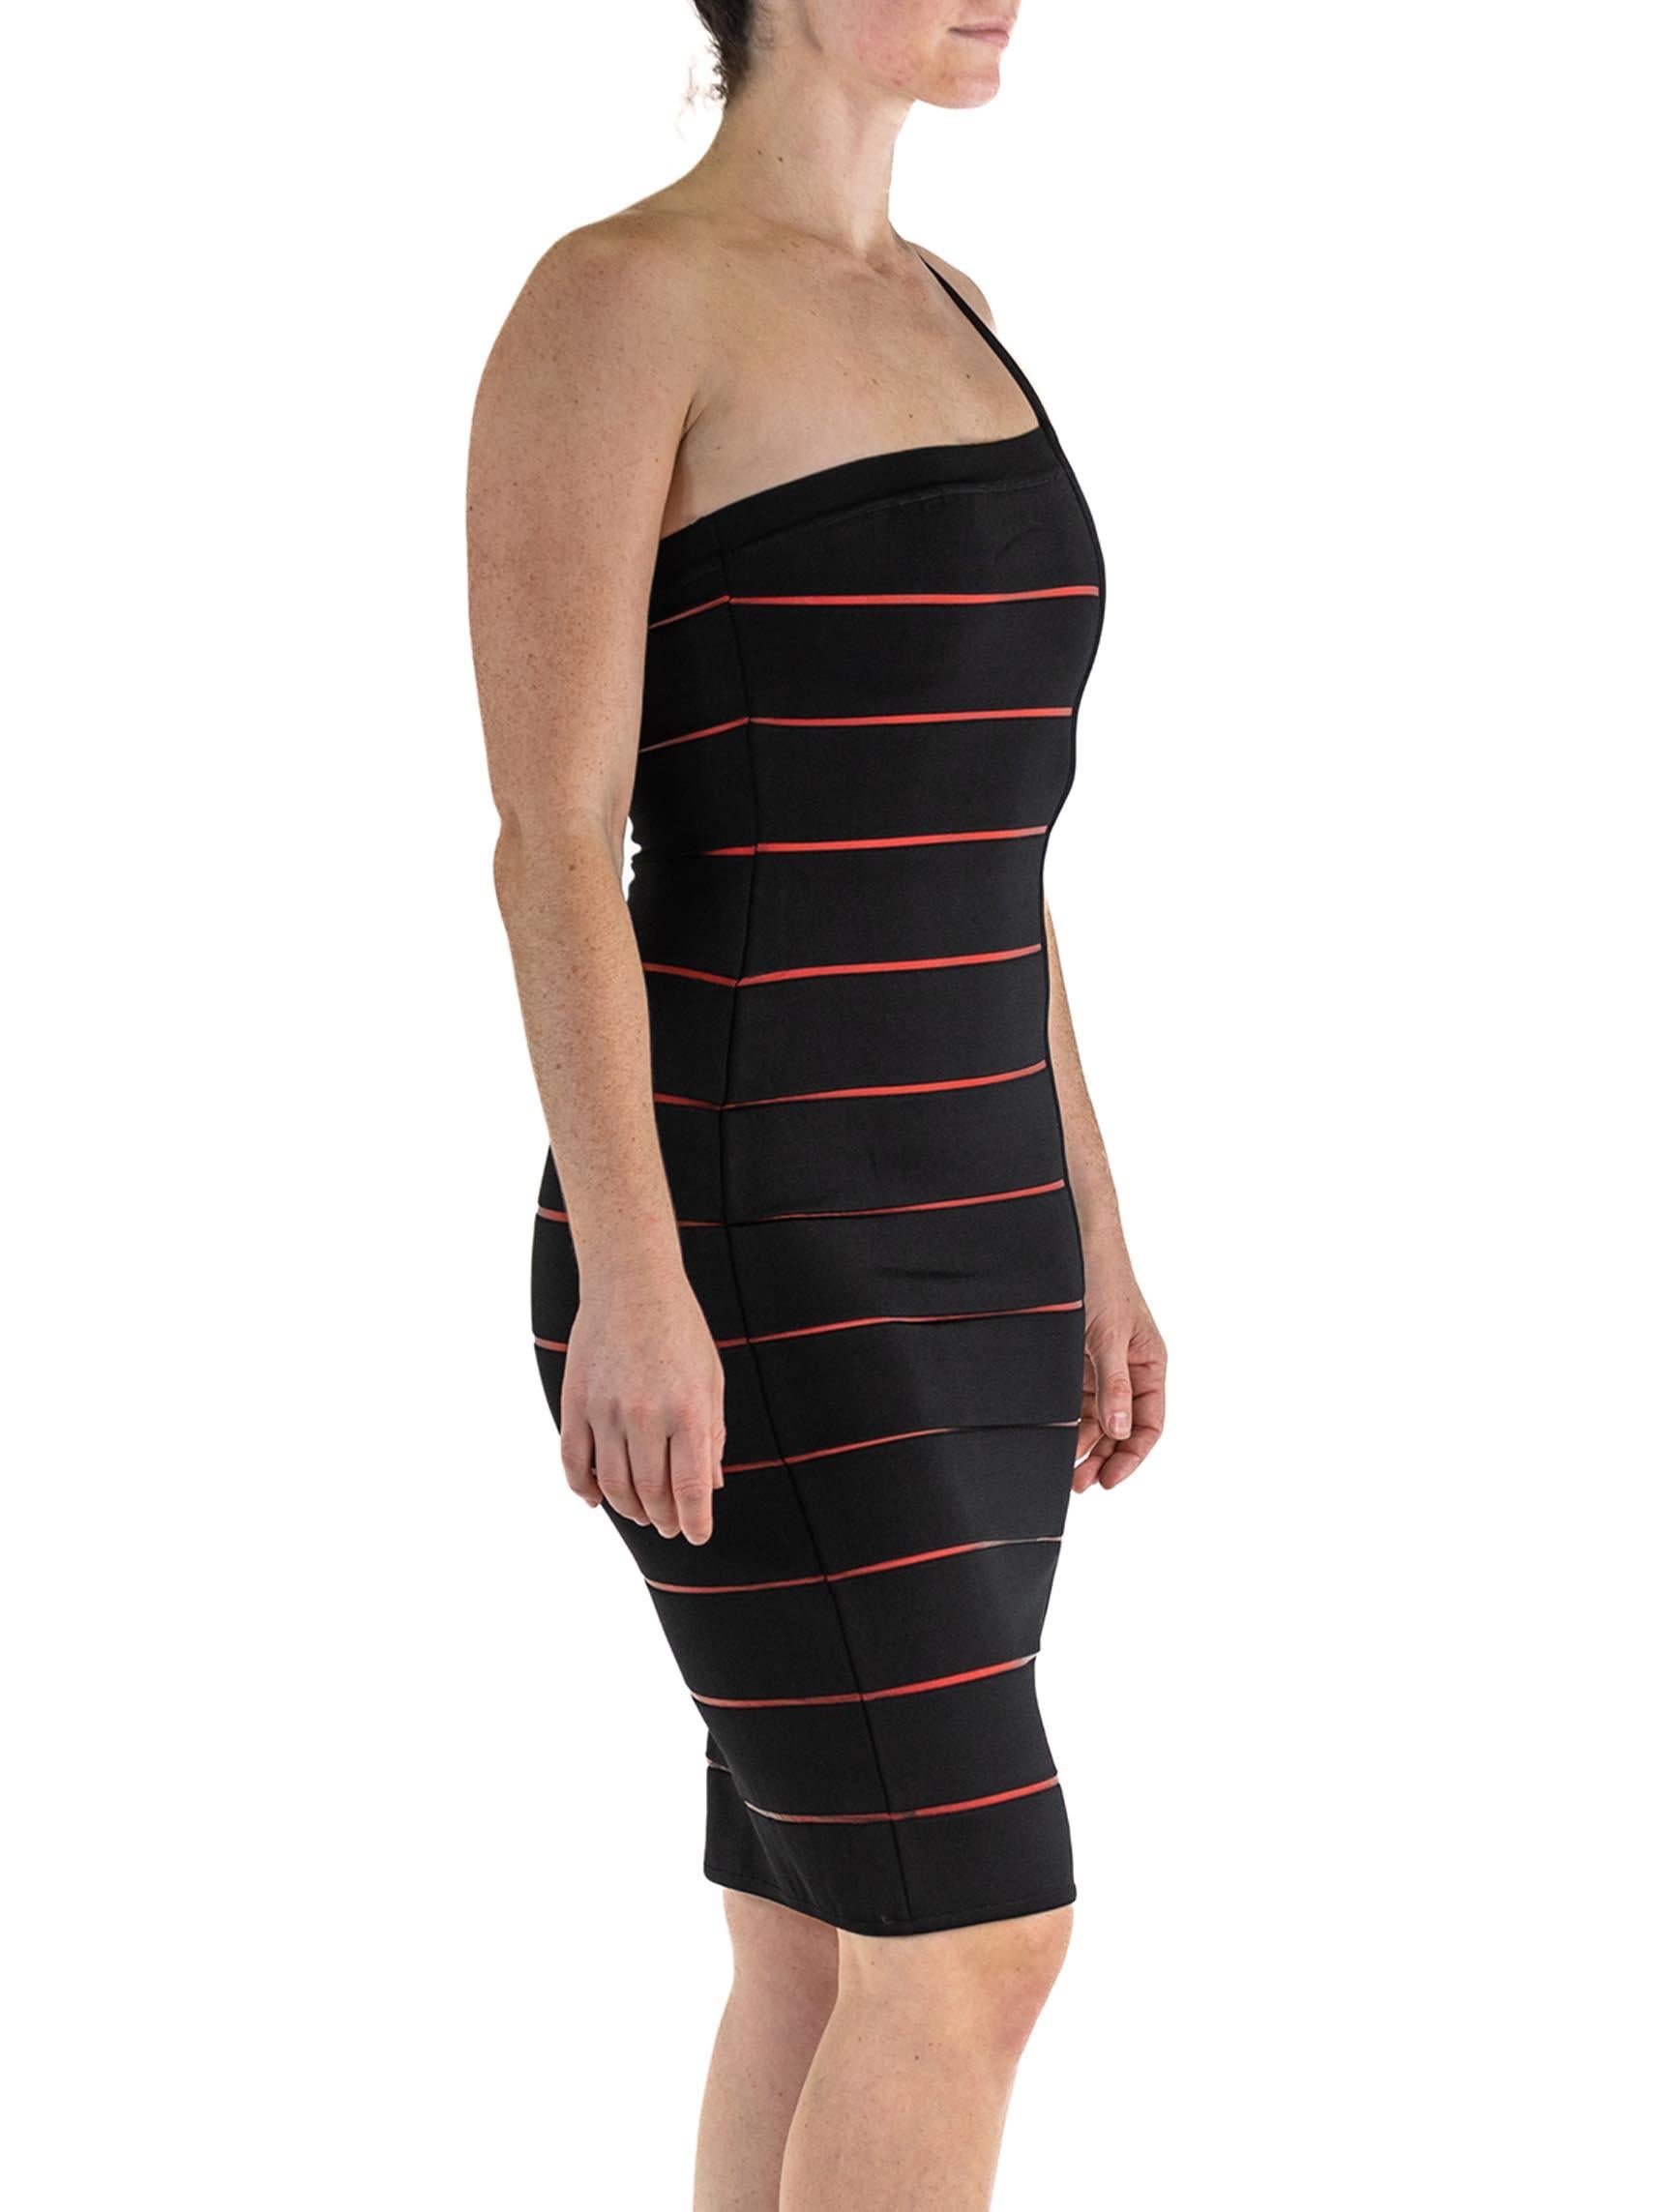 Women's 1990S HERVE LEGER Black & Red Rayon Blend Body-Con Cocktail Dress For Sale